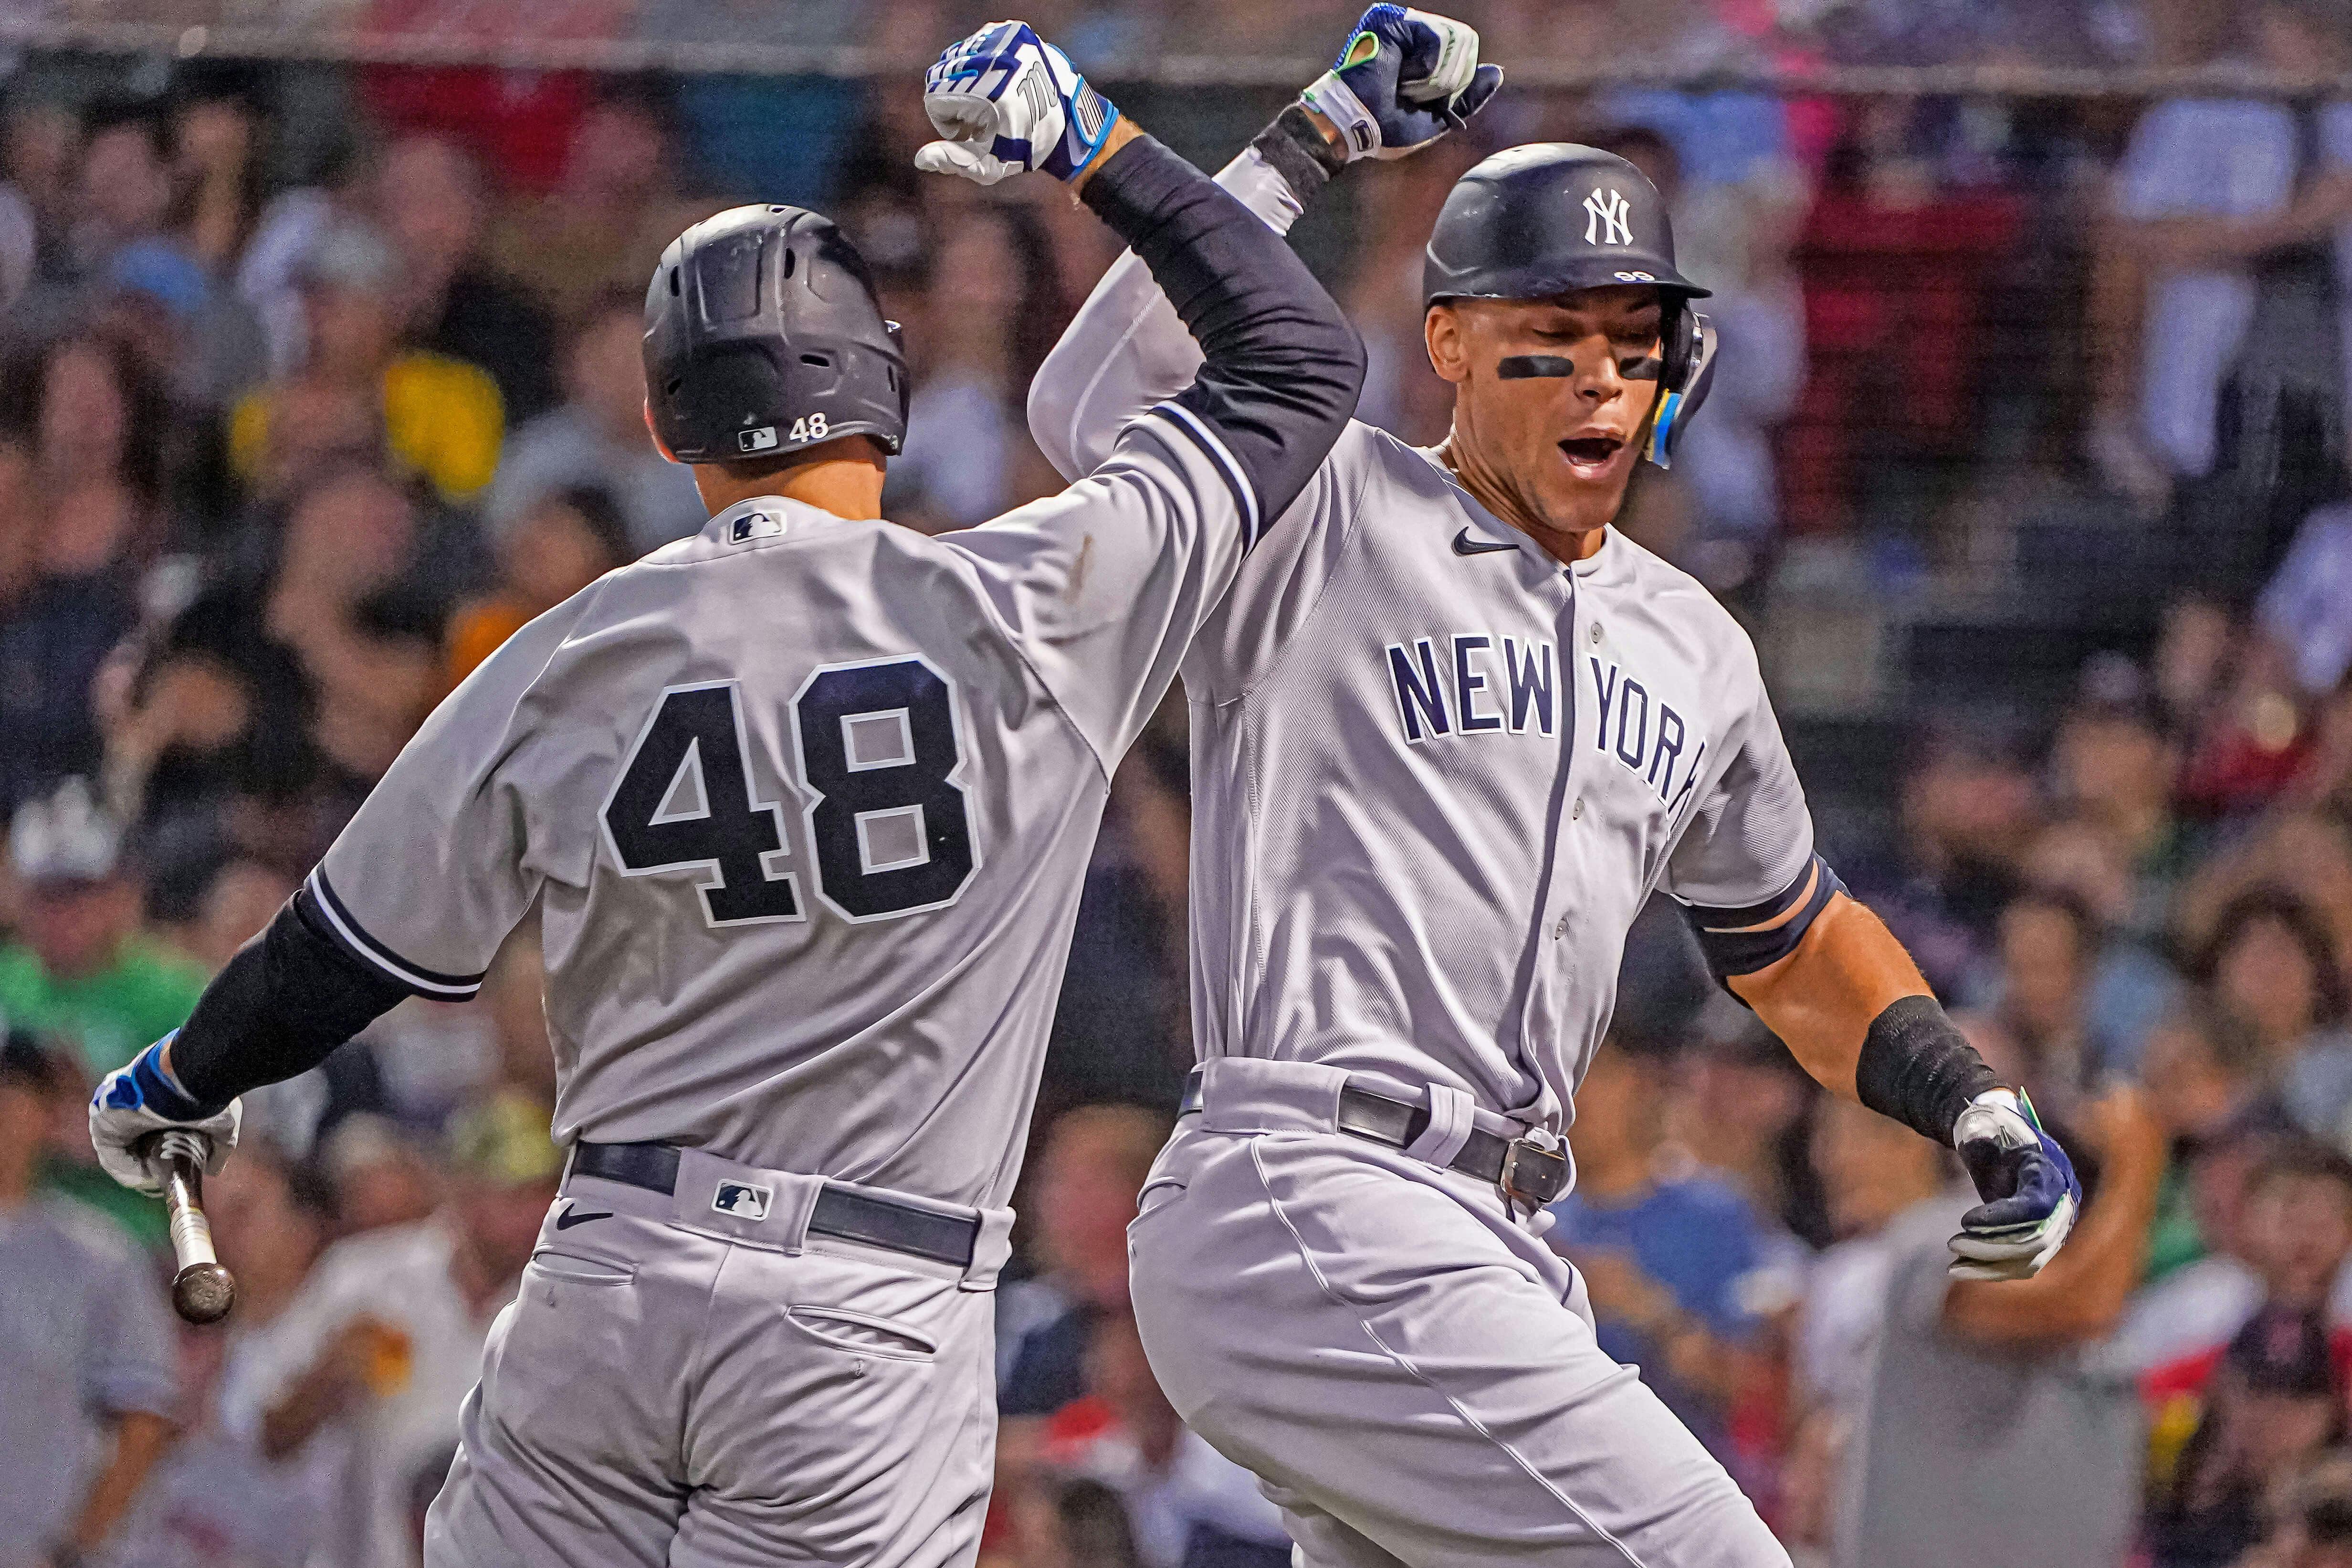 New York Yankees Anthony Rizzo and Aaron Judge celebrate during MLB action.